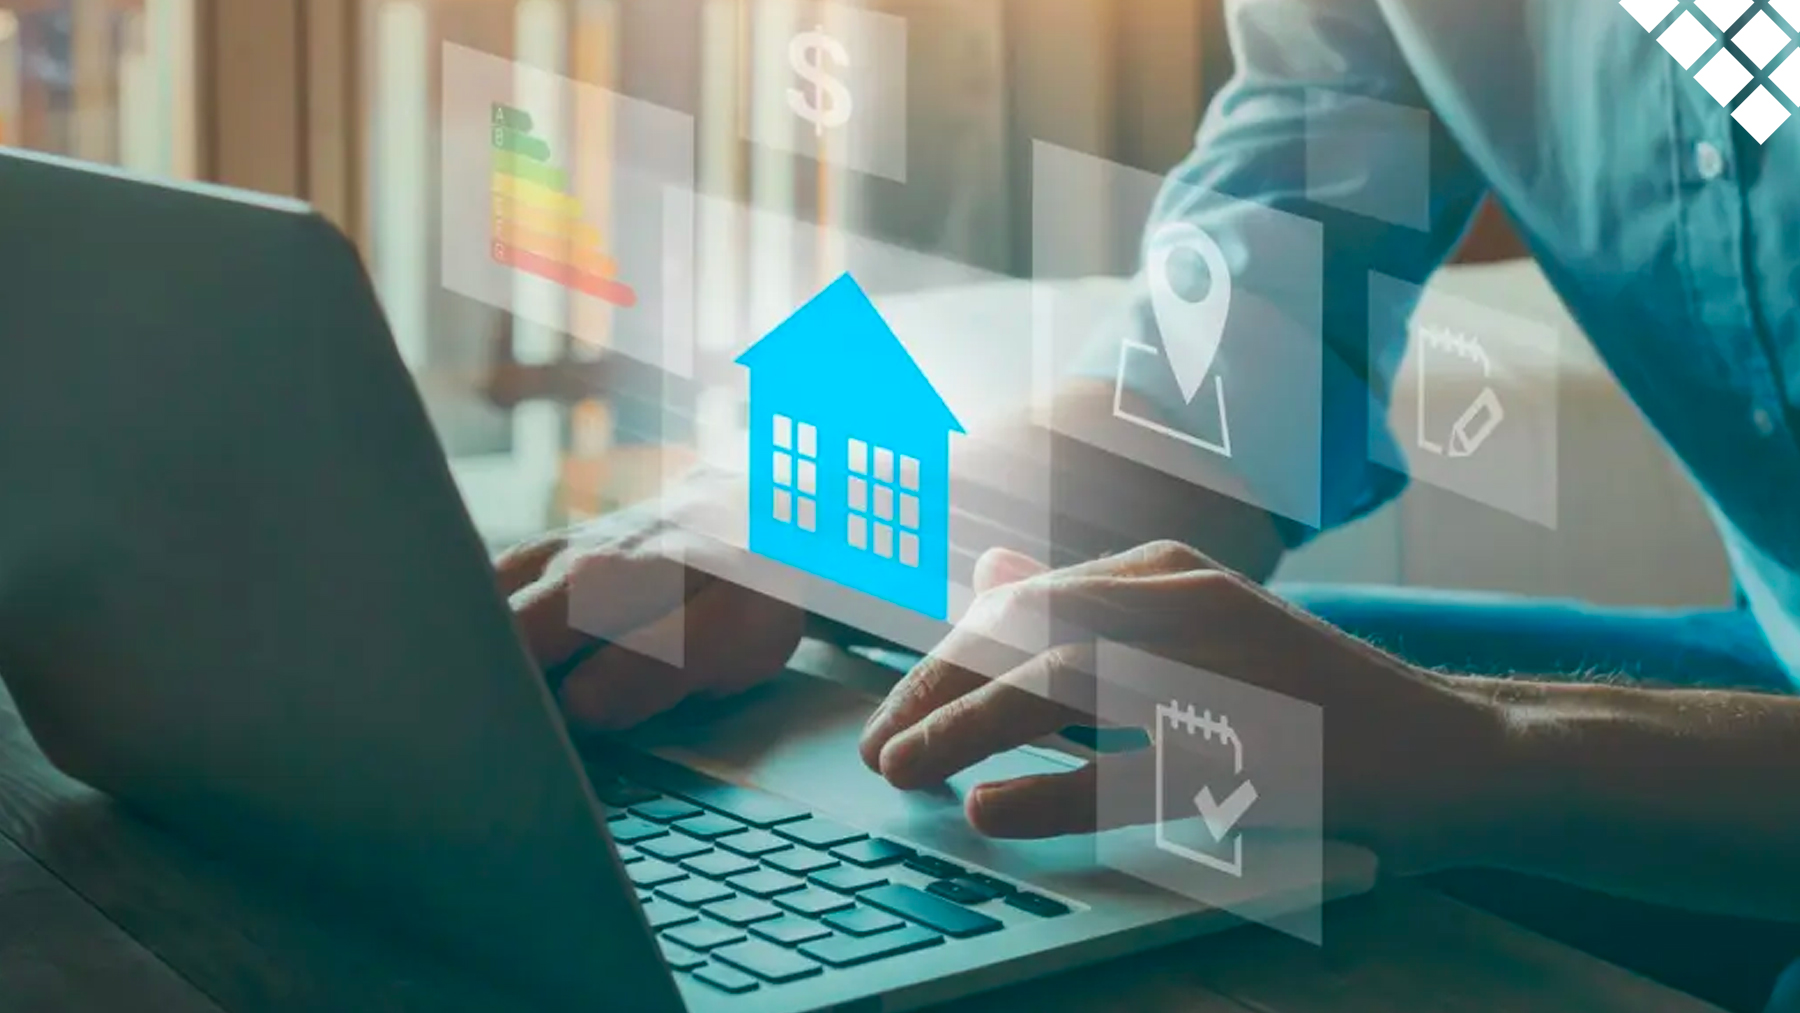 Man on laptop with icons floating and blue house icon in middle